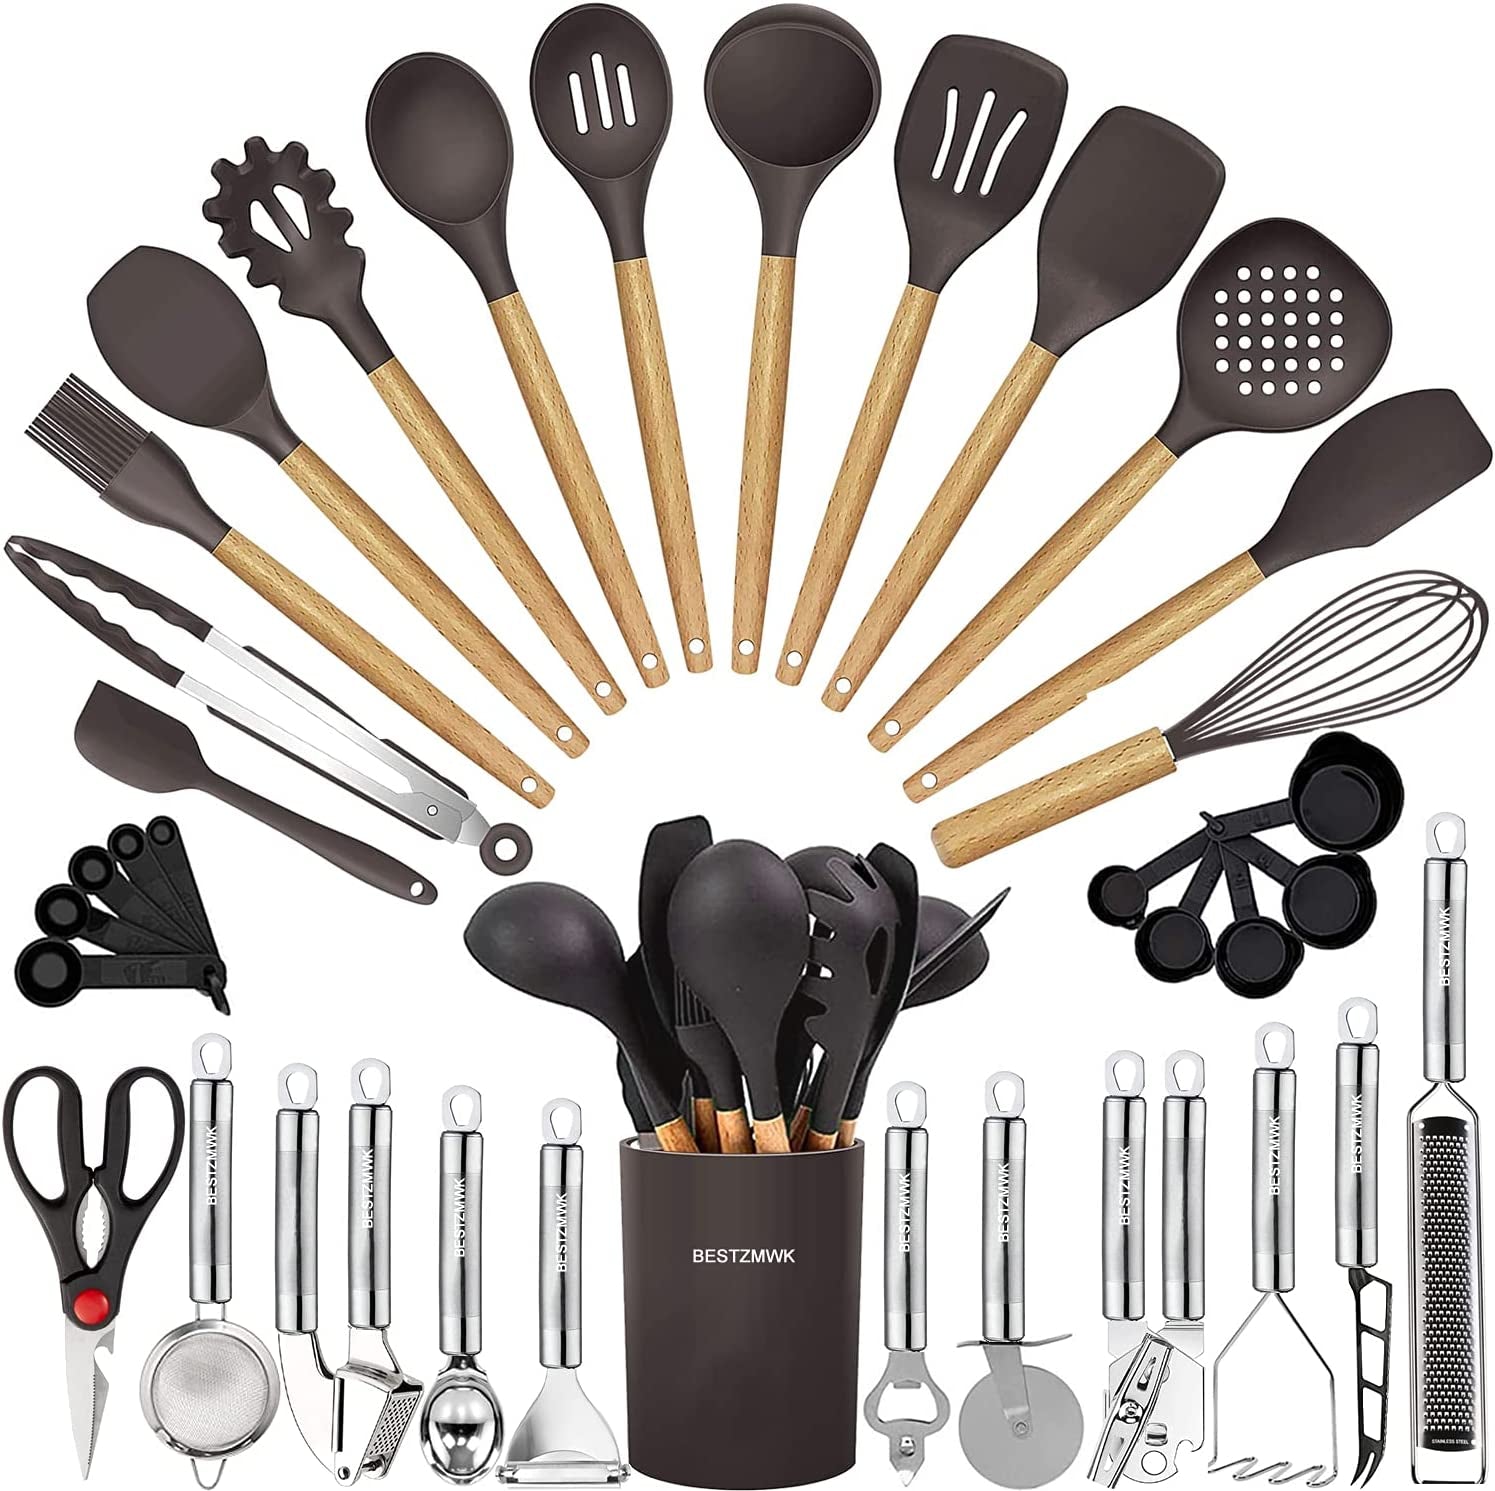  Kitchen Utensils Set Silicone Cooking Utensils Set for Nonstick  Cookware - Silicone Spatula Set And Wooden Kitchen Utensil Set Kitchen Tools,  Silicone Kitchen Utensils Set Cooking Spoon Kitchenware : Home 